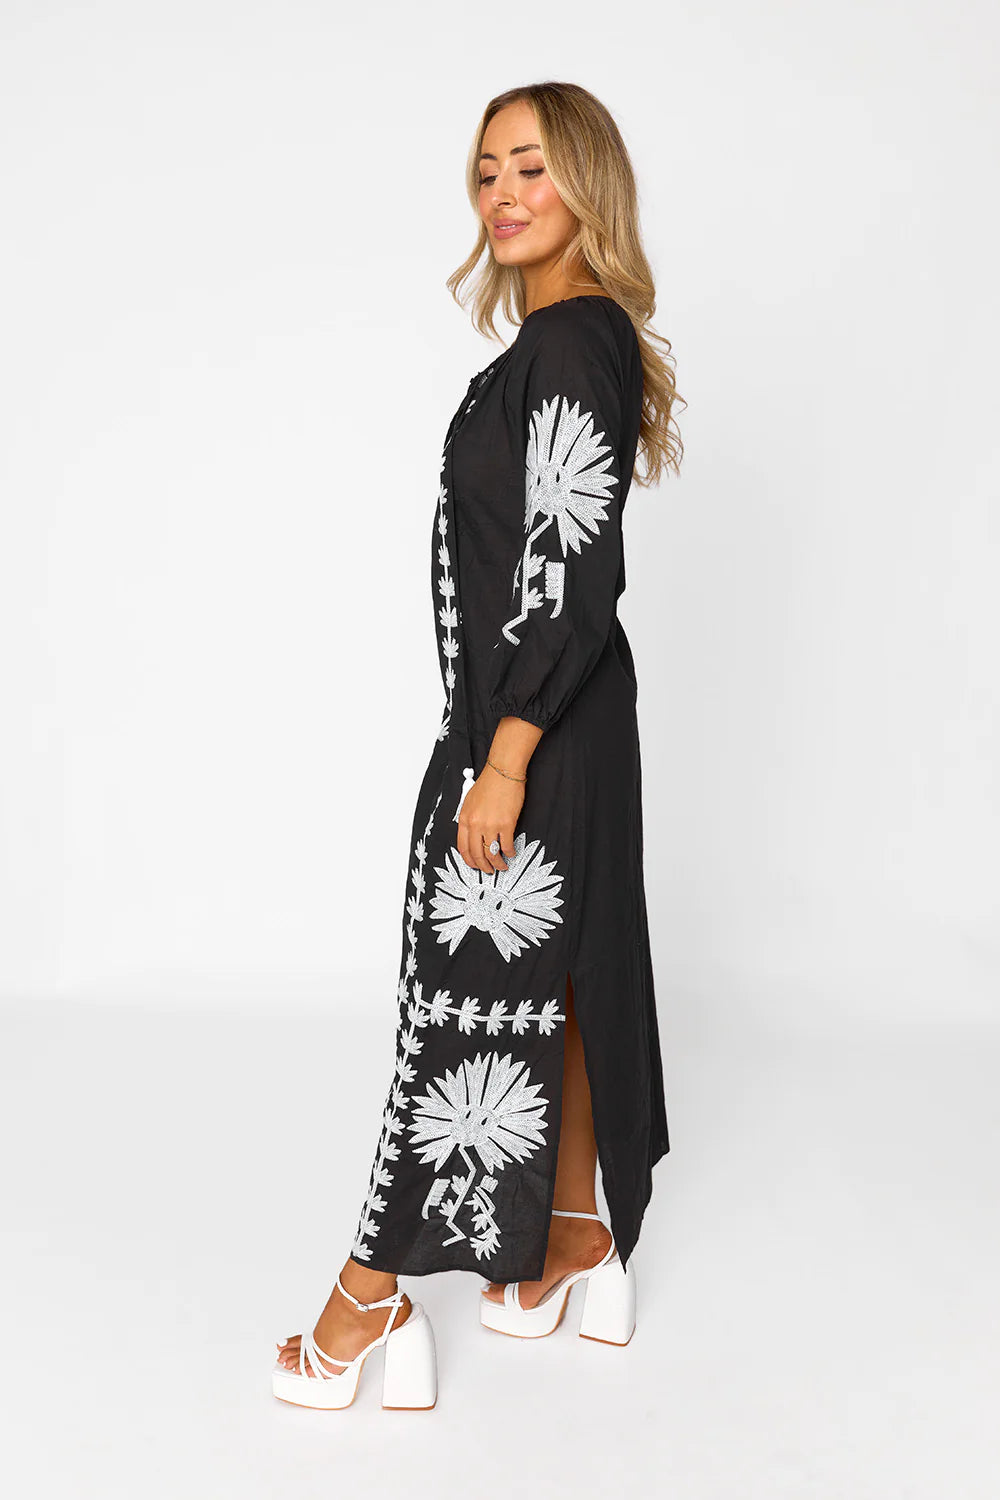 Tiffany Embroidered Caftan/ Floral Black Swimsuit coverup